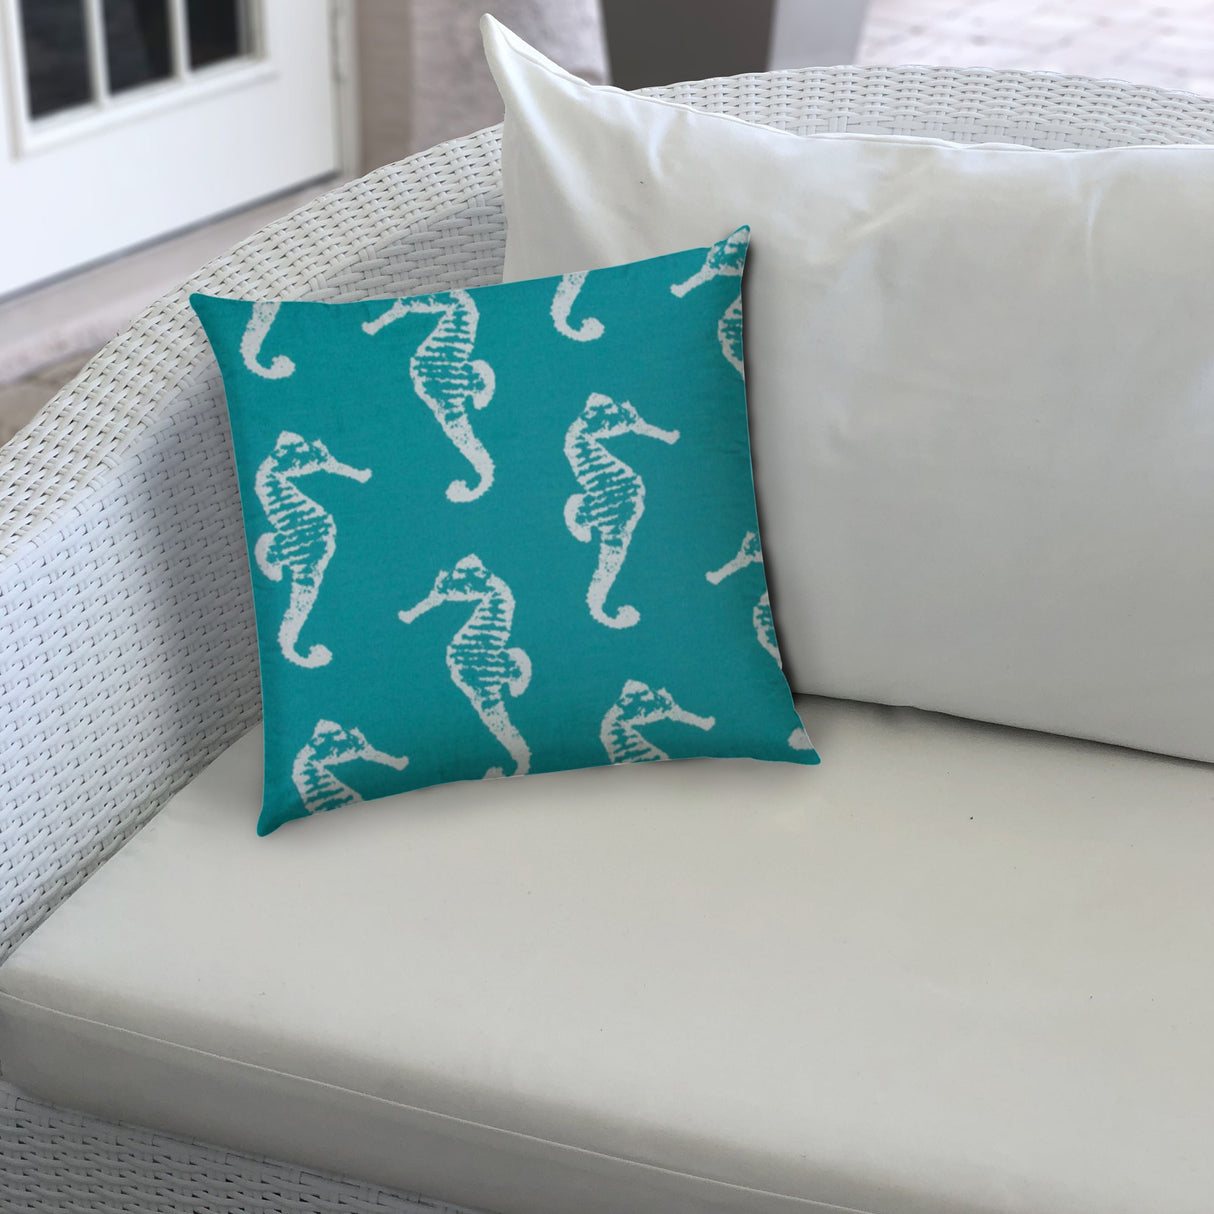 17" X 17" Turquoise And White Seahorse Blown Seam Coastal Lumbar Indoor Outdoor Pillow